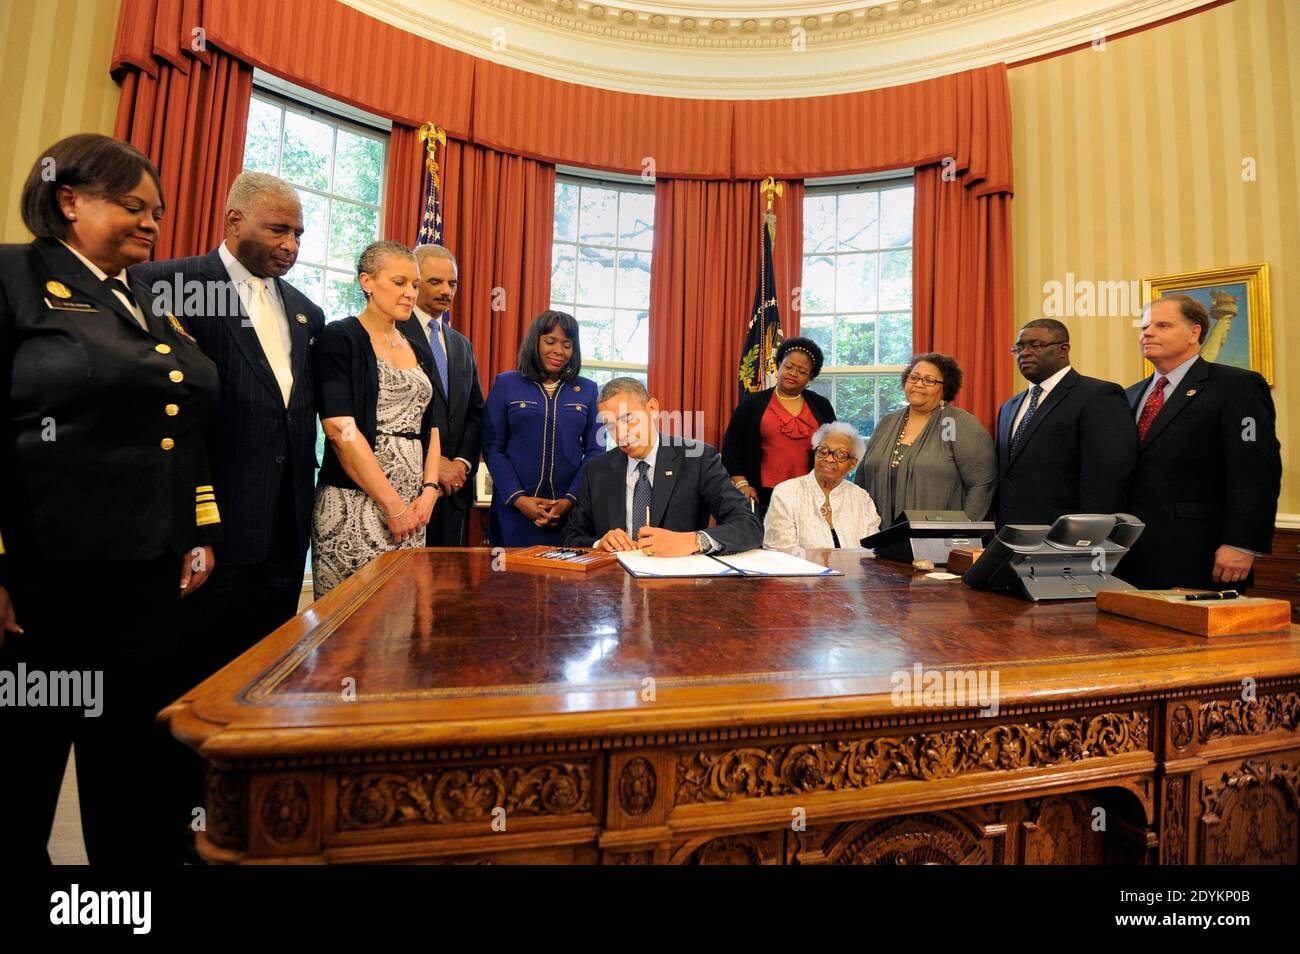 US President Barack Obama signs a bill in the Oval Office, May 24, 2013 in Washington, DC, USA, designating the Congressional Gold Medal commemorating the lives of the four young girls killed in the 16th Street Baptist Church Bombings of 1963 in Birmingham, Alabama. Witnessing (L-R) Surgeon General Regina Benjamin, Birmingham Mayor William Bell, Dr Sharon Malone Holder, Attorney General Eric Holder, Rep Terri Sewell (D-AL), Thelma Pippen McNair (mother of Denise McNair), Lisa McNair (sister of Denise McNair), Dianne Braddock (sister of Carole Robertson), Rev Arthur Price, Jr (pastor 16th Stree Stock Photo